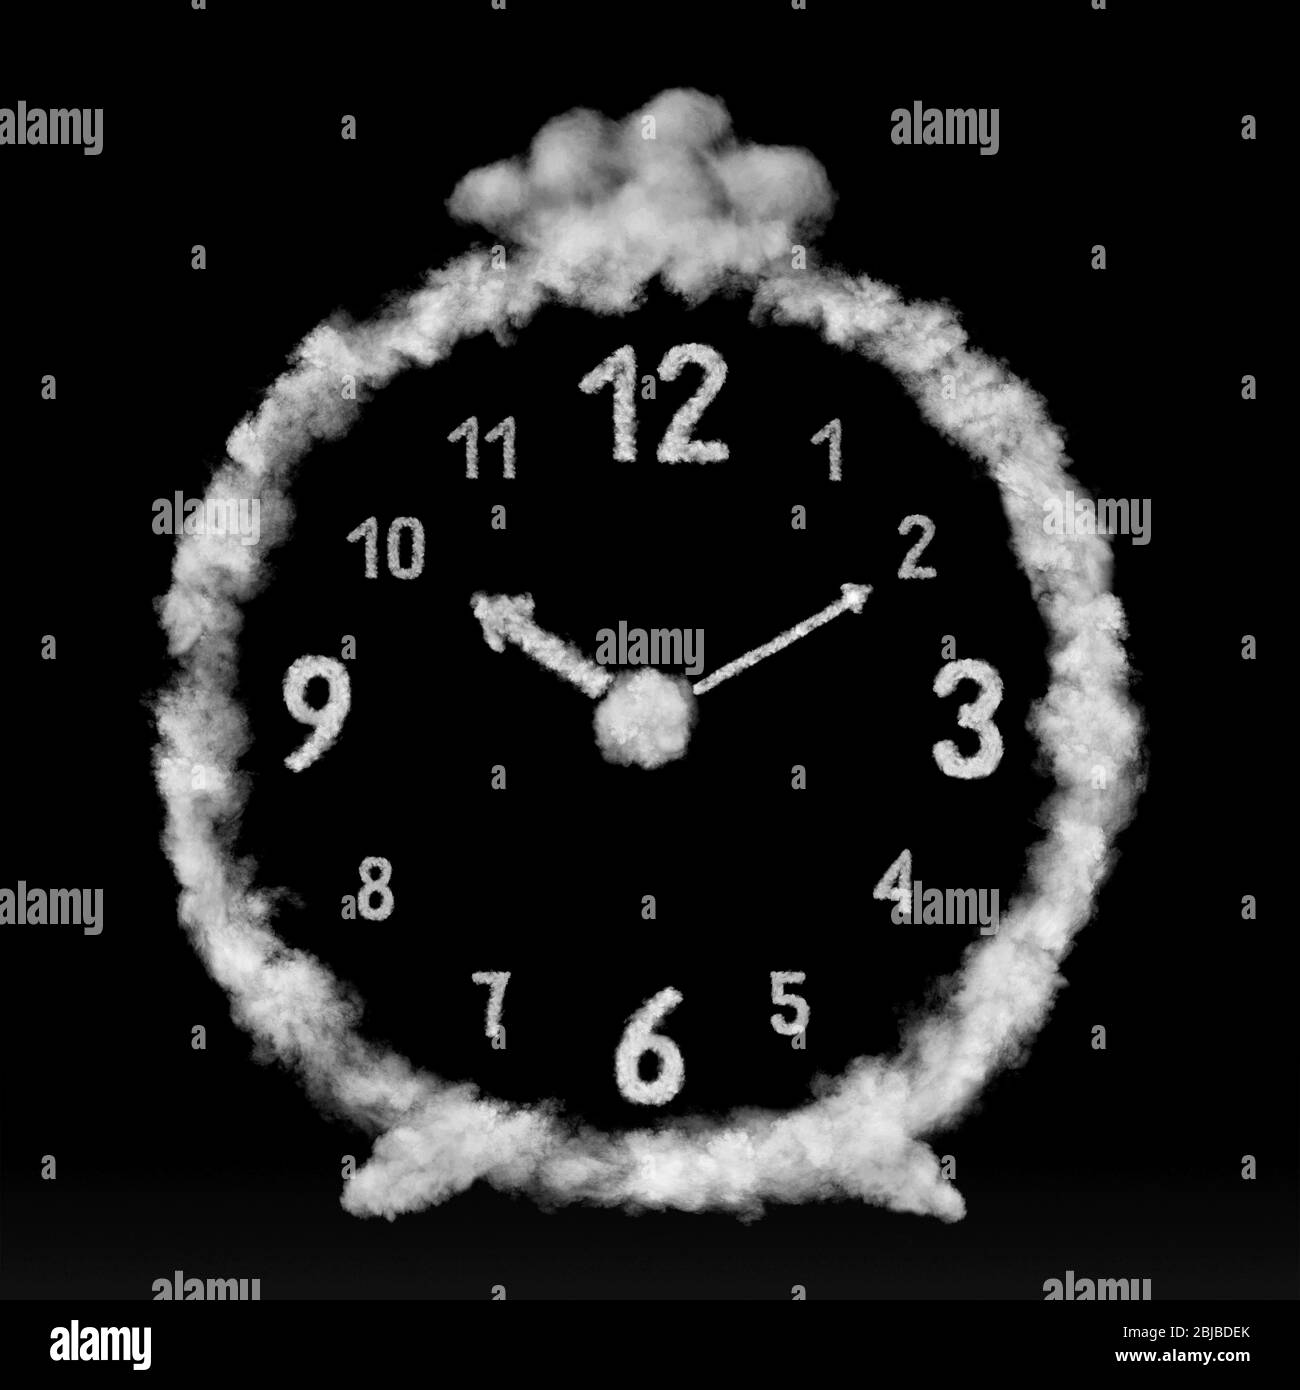 The alarm clock made from white clouds on a black background. Stock Photo